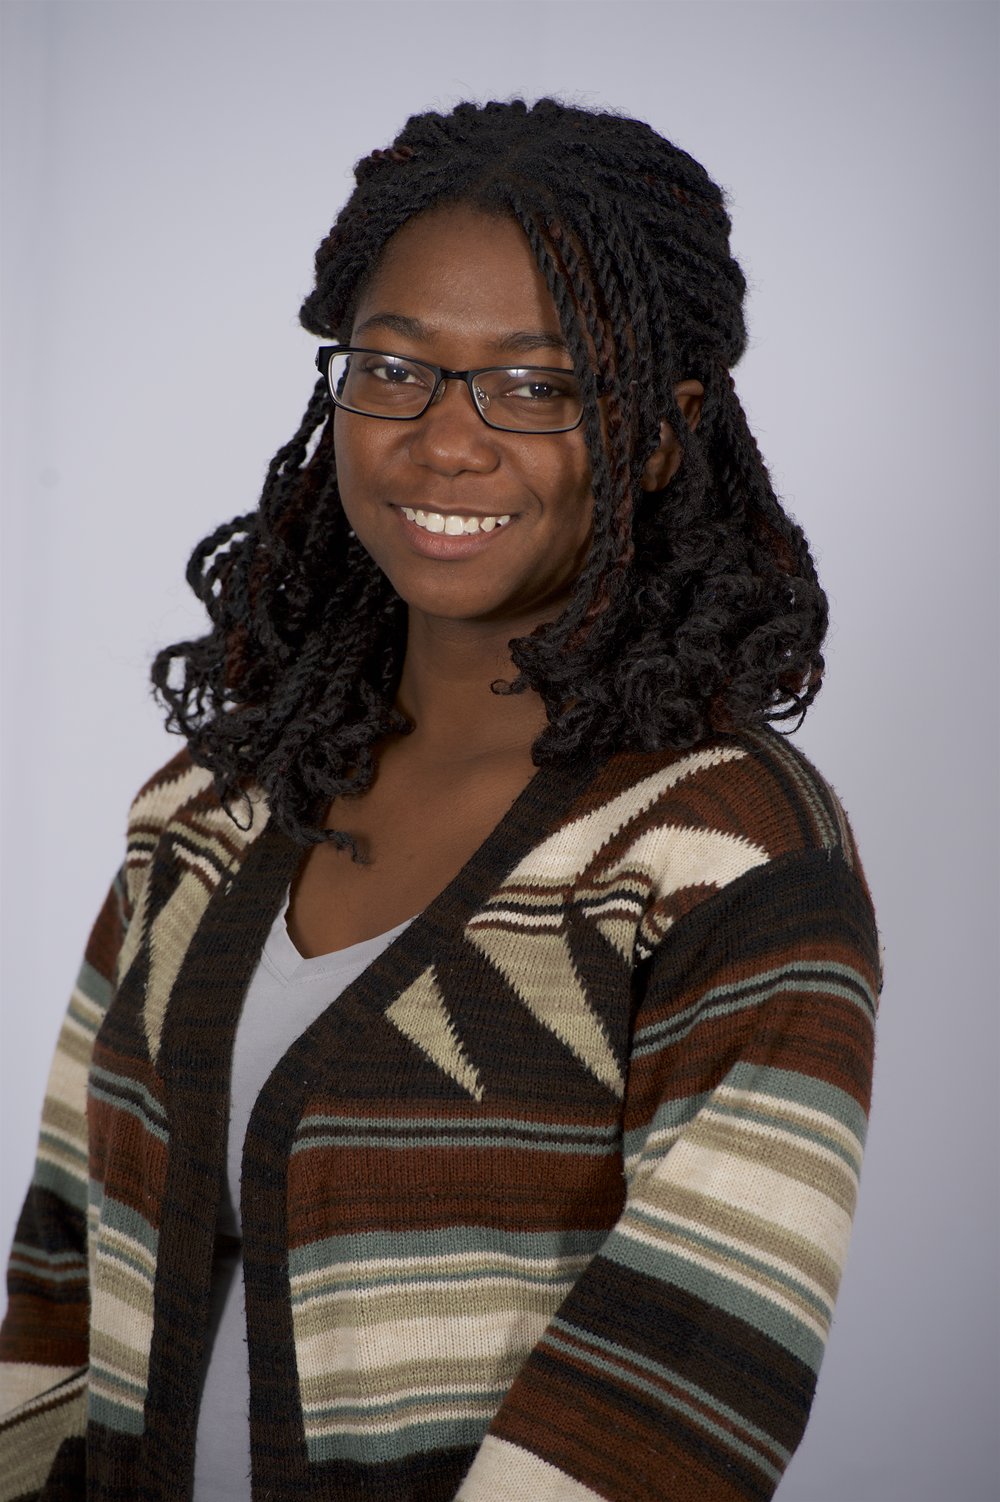 Photo of doctoral student Sikoya Ashburn wearing a striped sweater and glasses